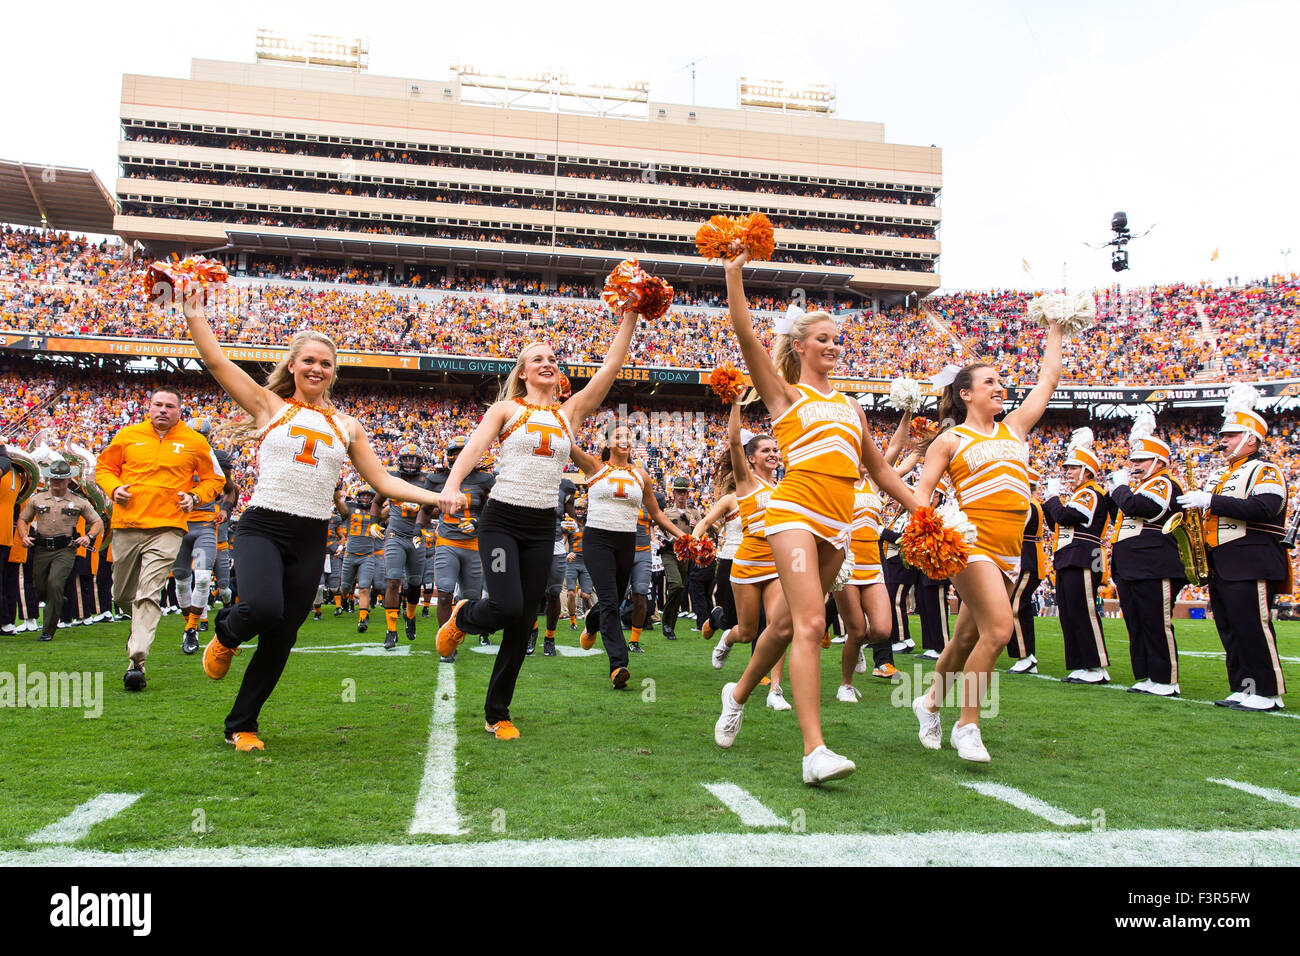 October 10, 2015: head coach Butch Jones of the Tennessee Volunteers and cheerleaders running through the power T before the NCAA Football game between the University of Tennessee Volunteers and the Georgia Bulldogs at Neyland Stadium in Knoxville, TN Tim Gangloff/CSM Stock Photo